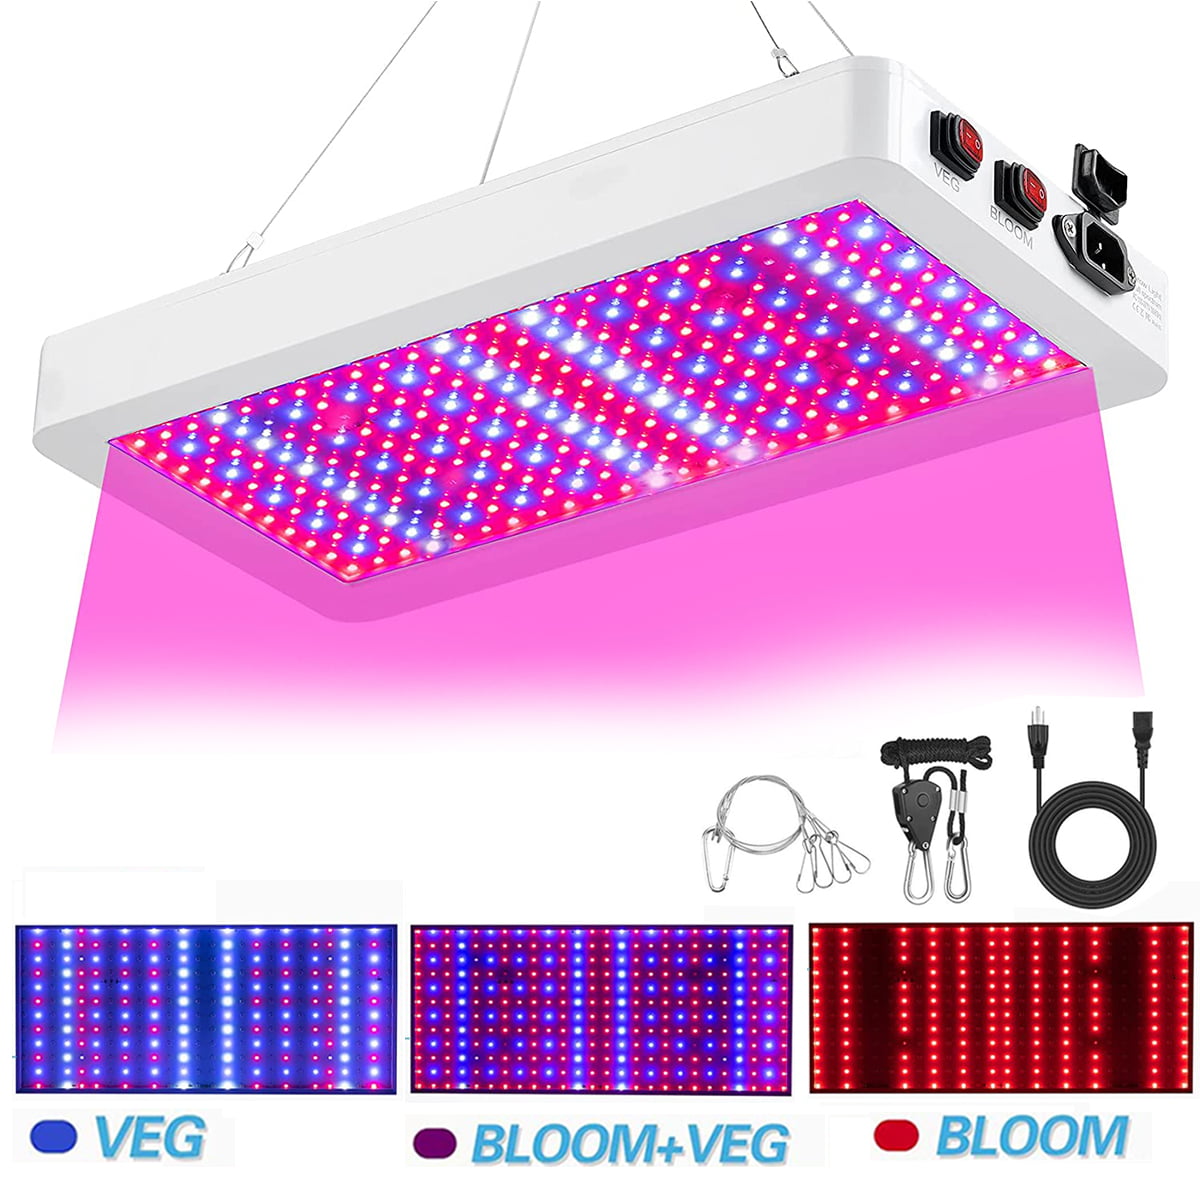 1200W Powered LED Grow Light Full Spectrum Growing Lamp For Hydroponic Veg Plant 